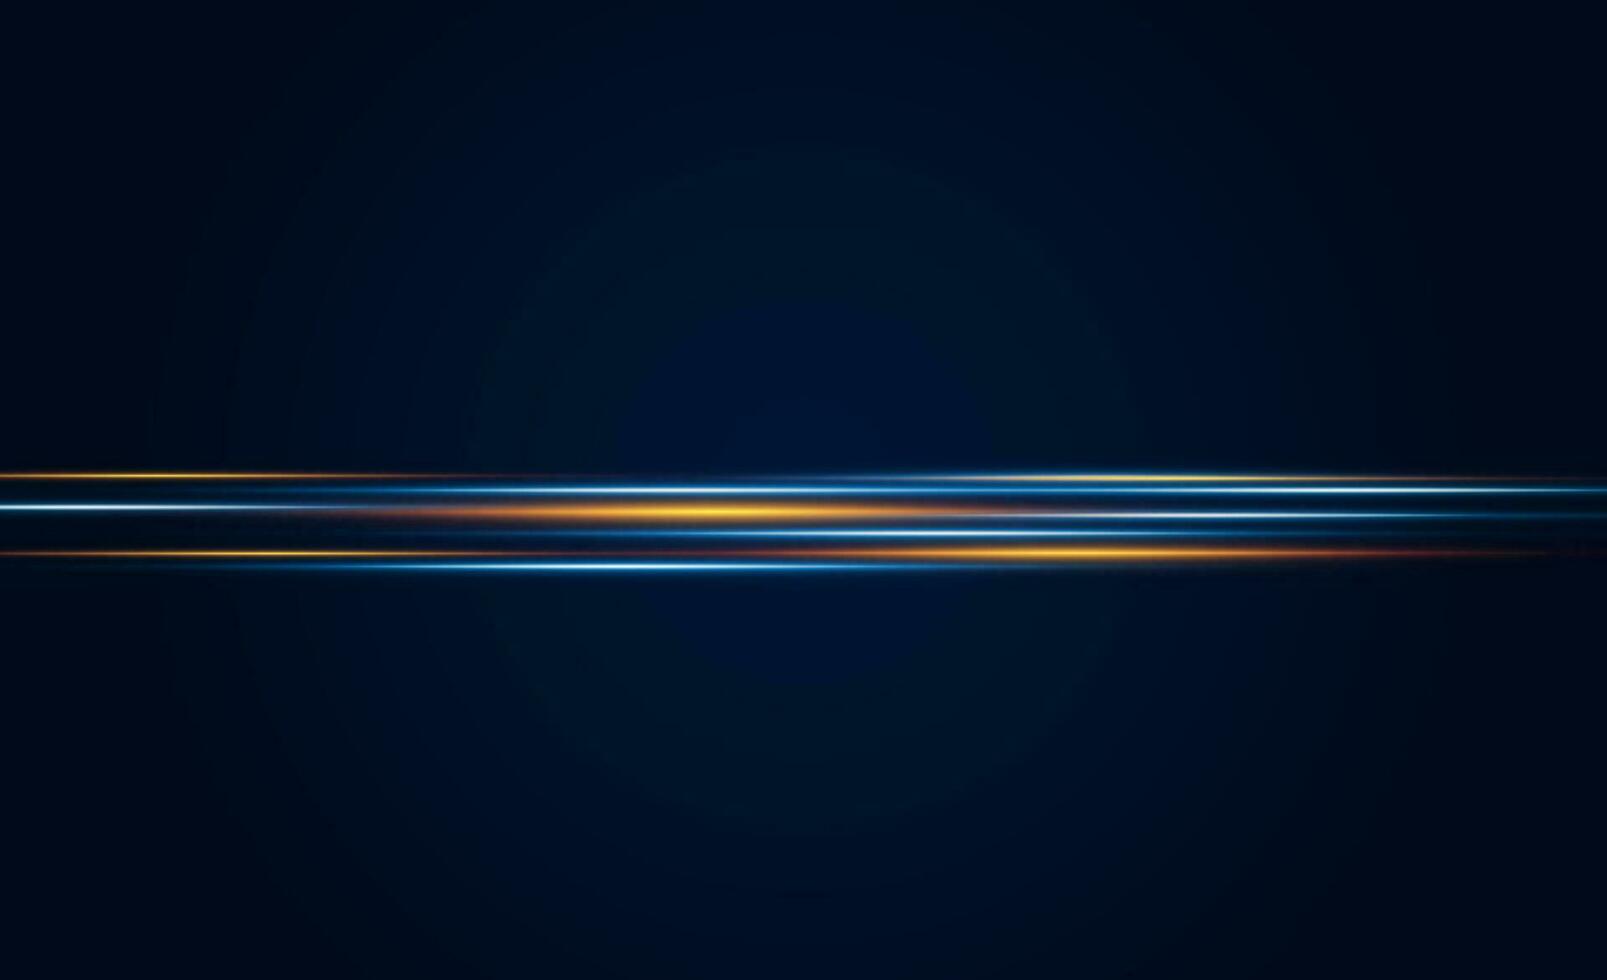 Abstract speed Light out technology background Hitech communication concept innovation background,  vector design